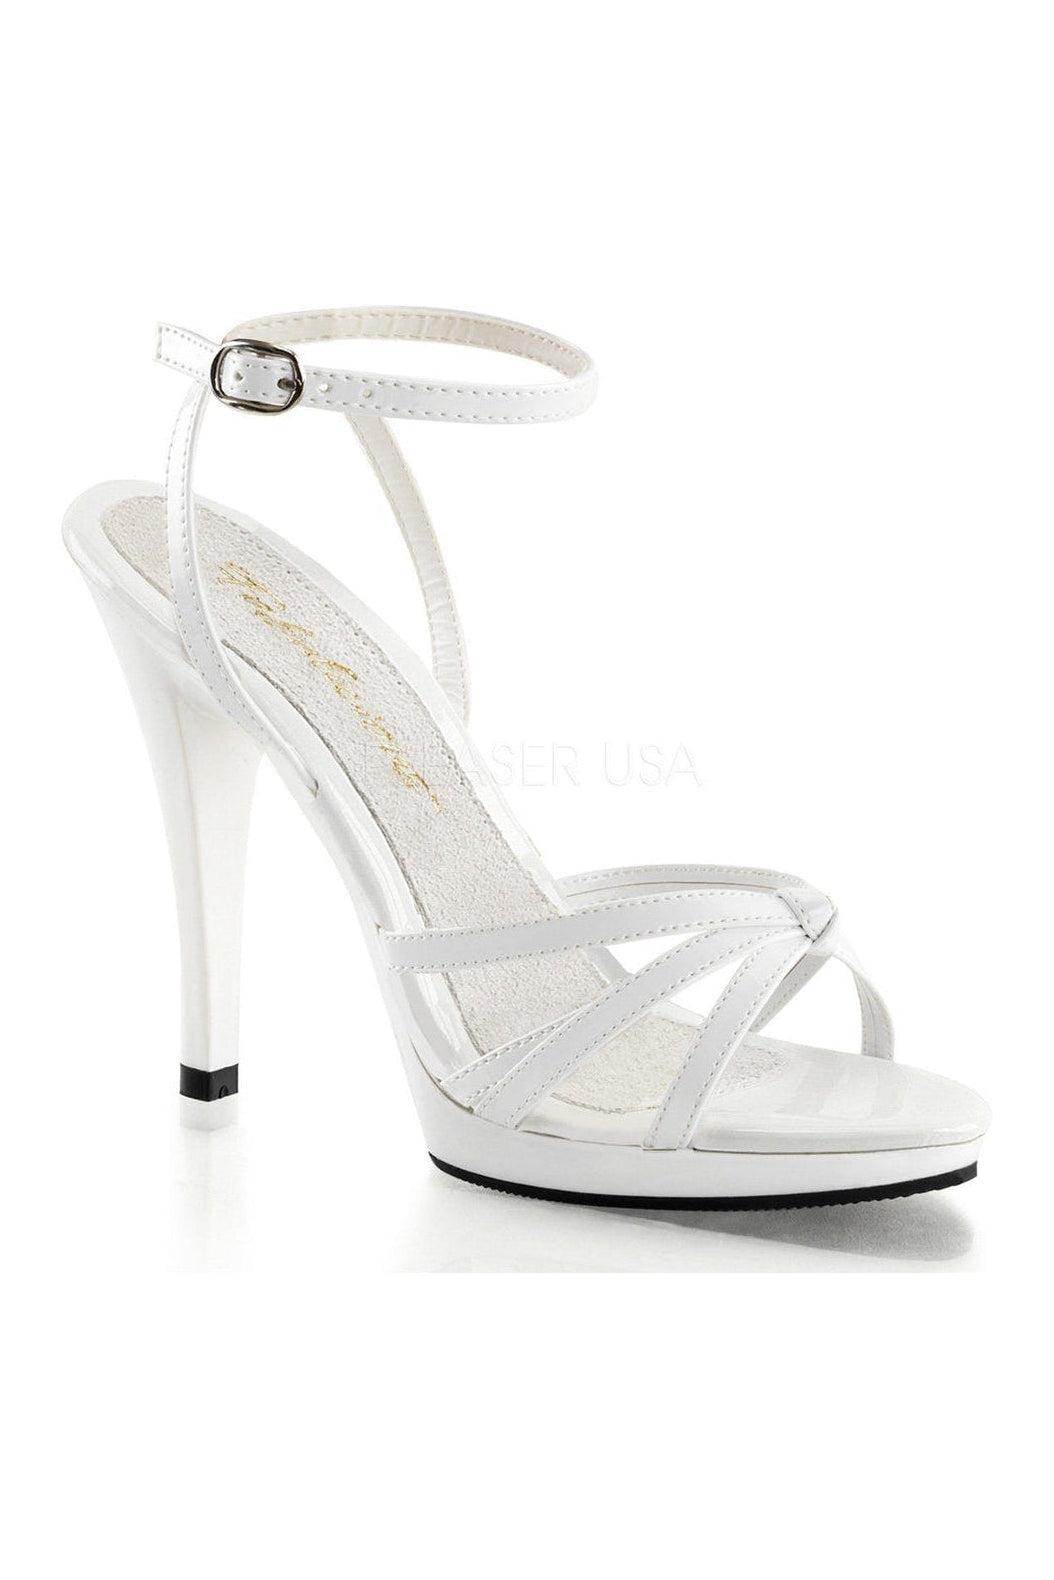 FLAIR-436 Sandal | White Patent-Fabulicious-White-Sandals-SEXYSHOES.COM